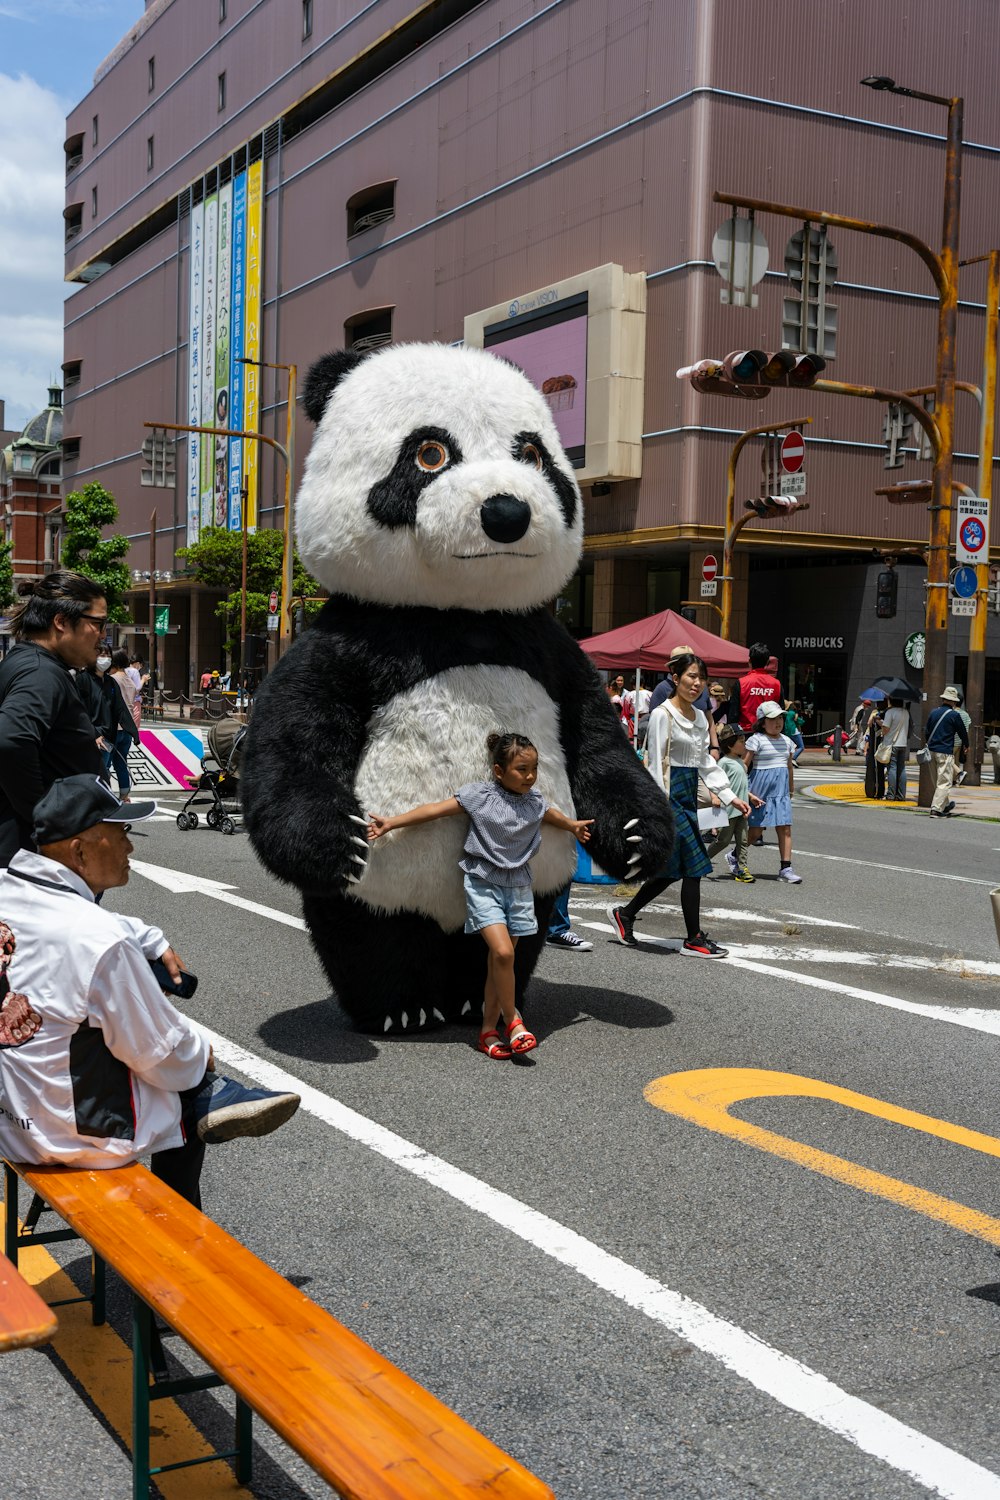 a giant panda bear standing in the middle of a street